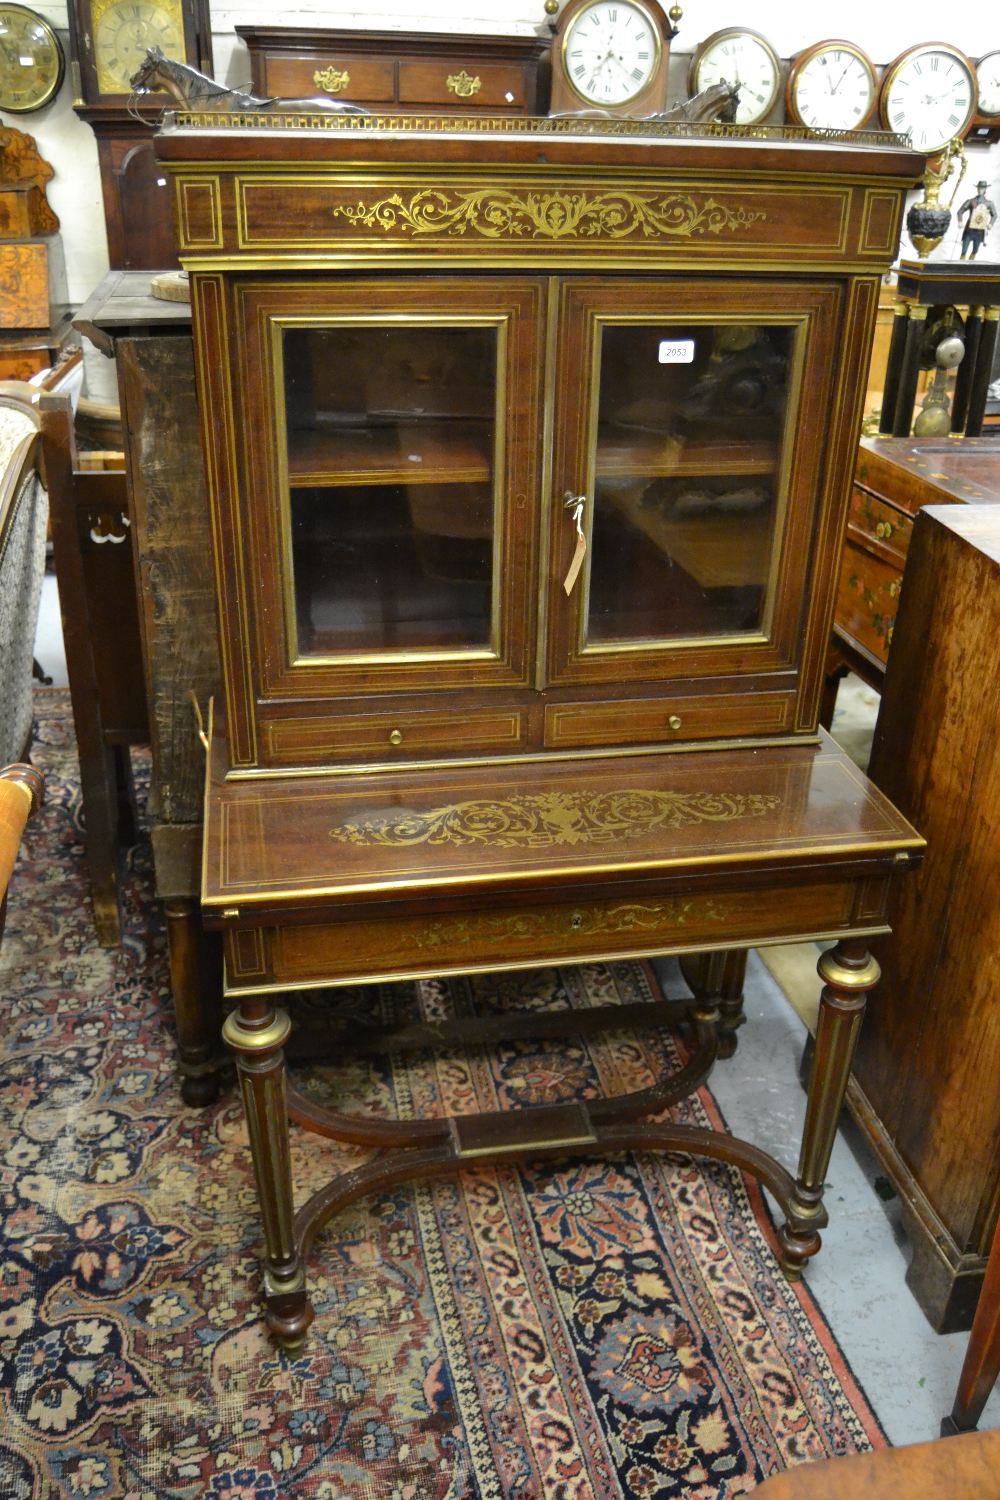 19th Century French mahogany brass inlaid bonheur du jour with a galleried top above two glazed